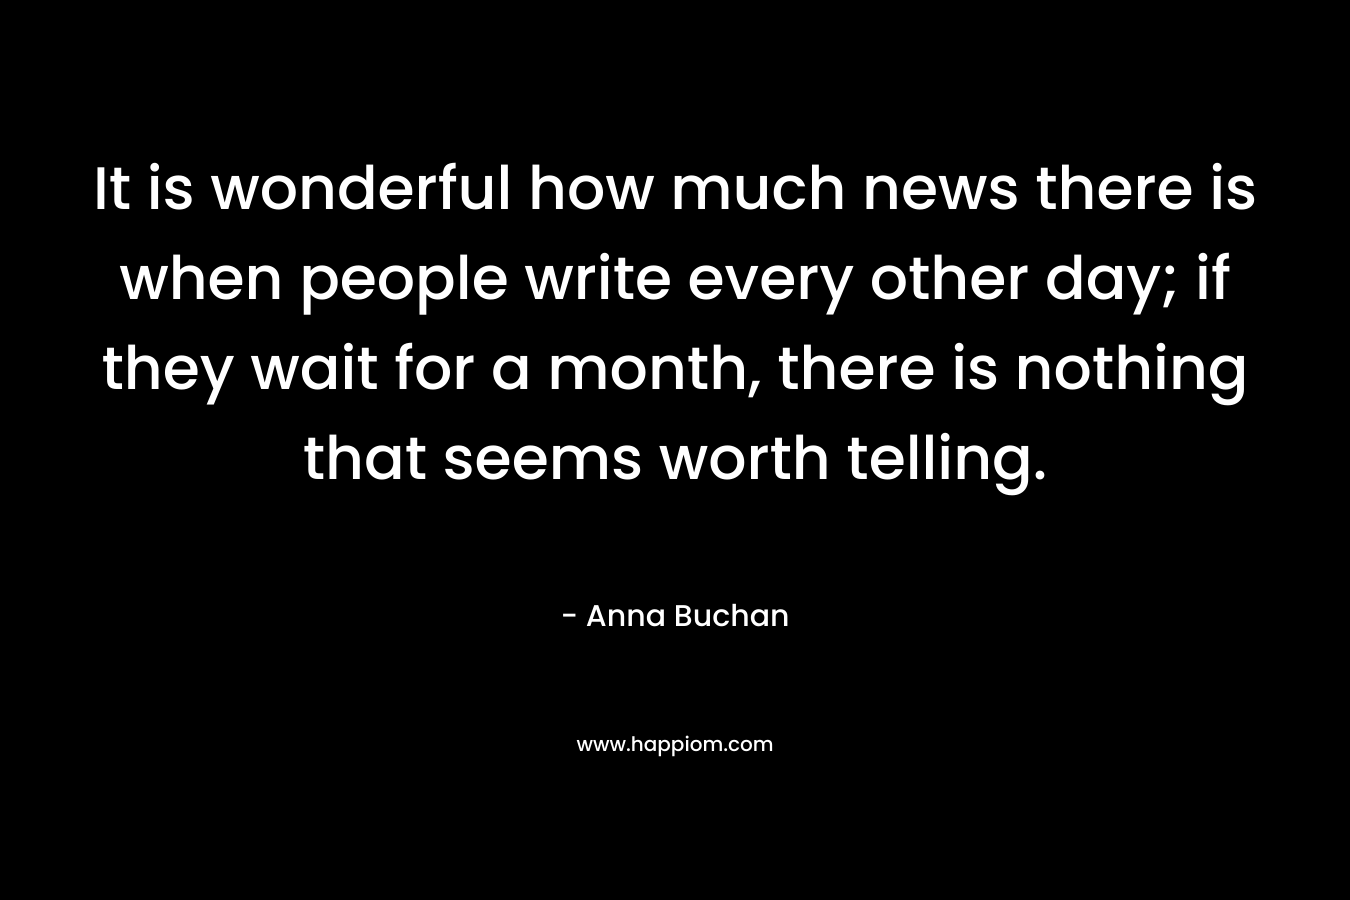 It is wonderful how much news there is when people write every other day; if they wait for a month, there is nothing that seems worth telling. – Anna Buchan